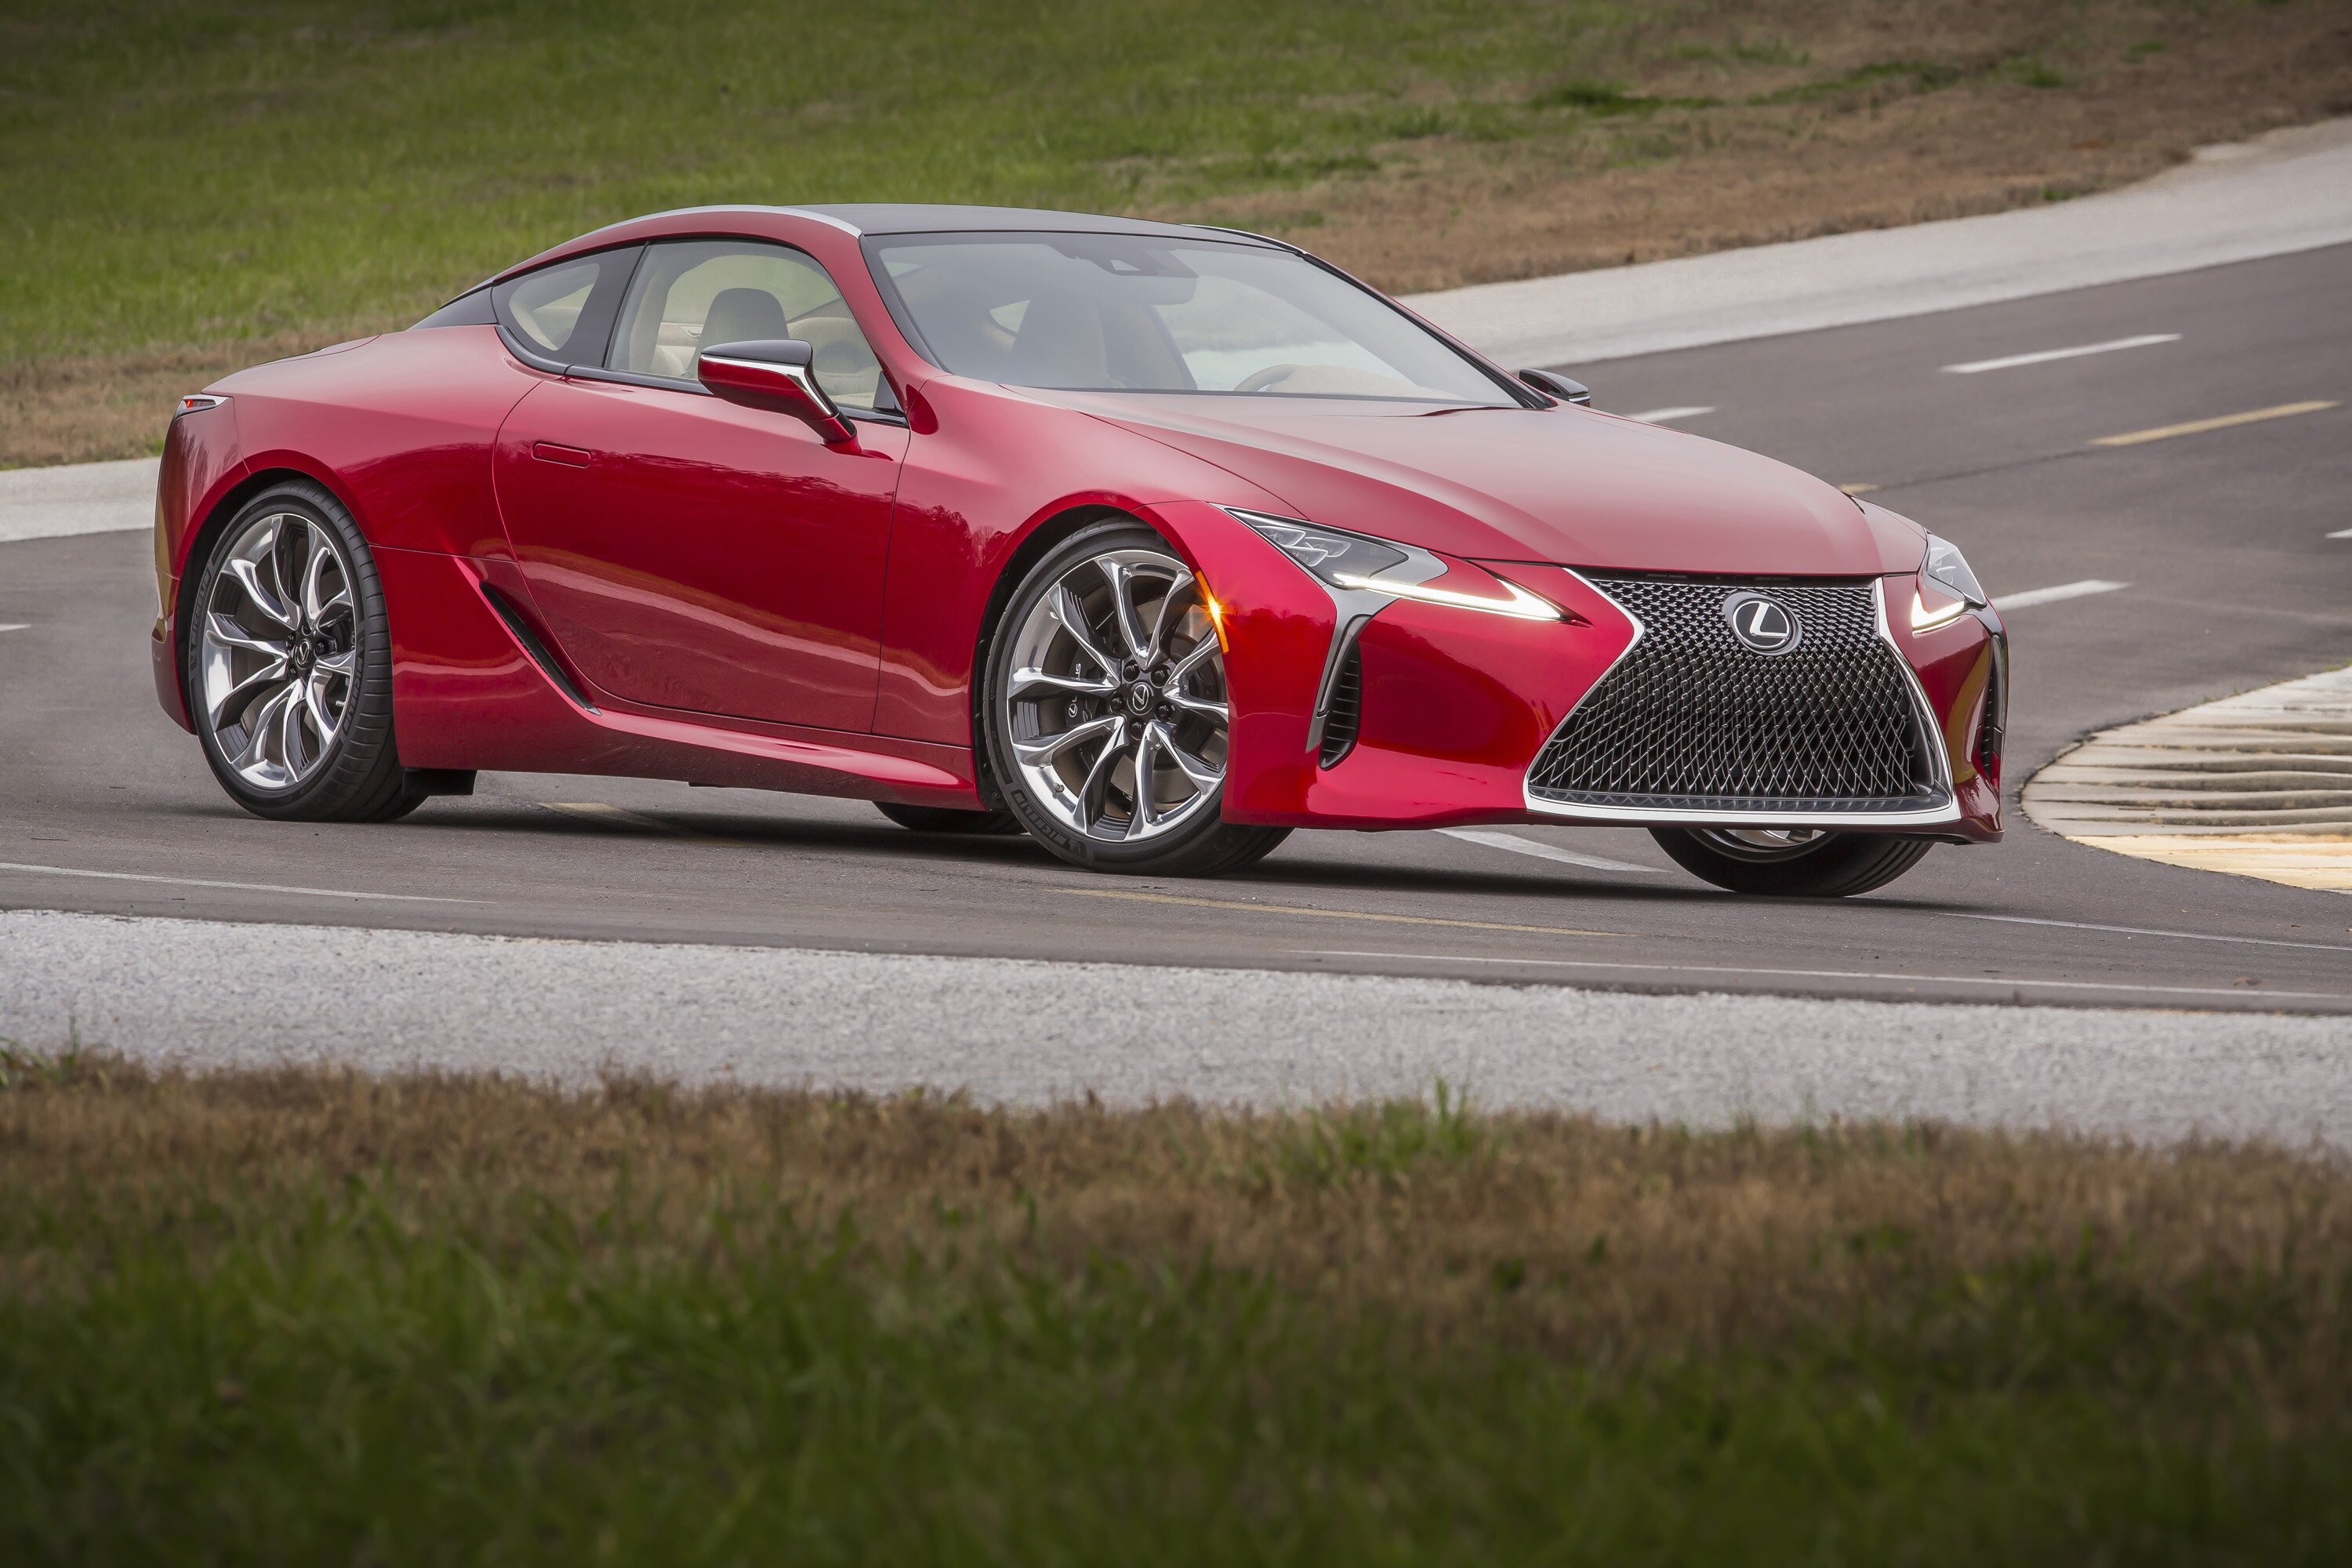 The Lexus LC 500 is the latest addition to the car maker's sports range